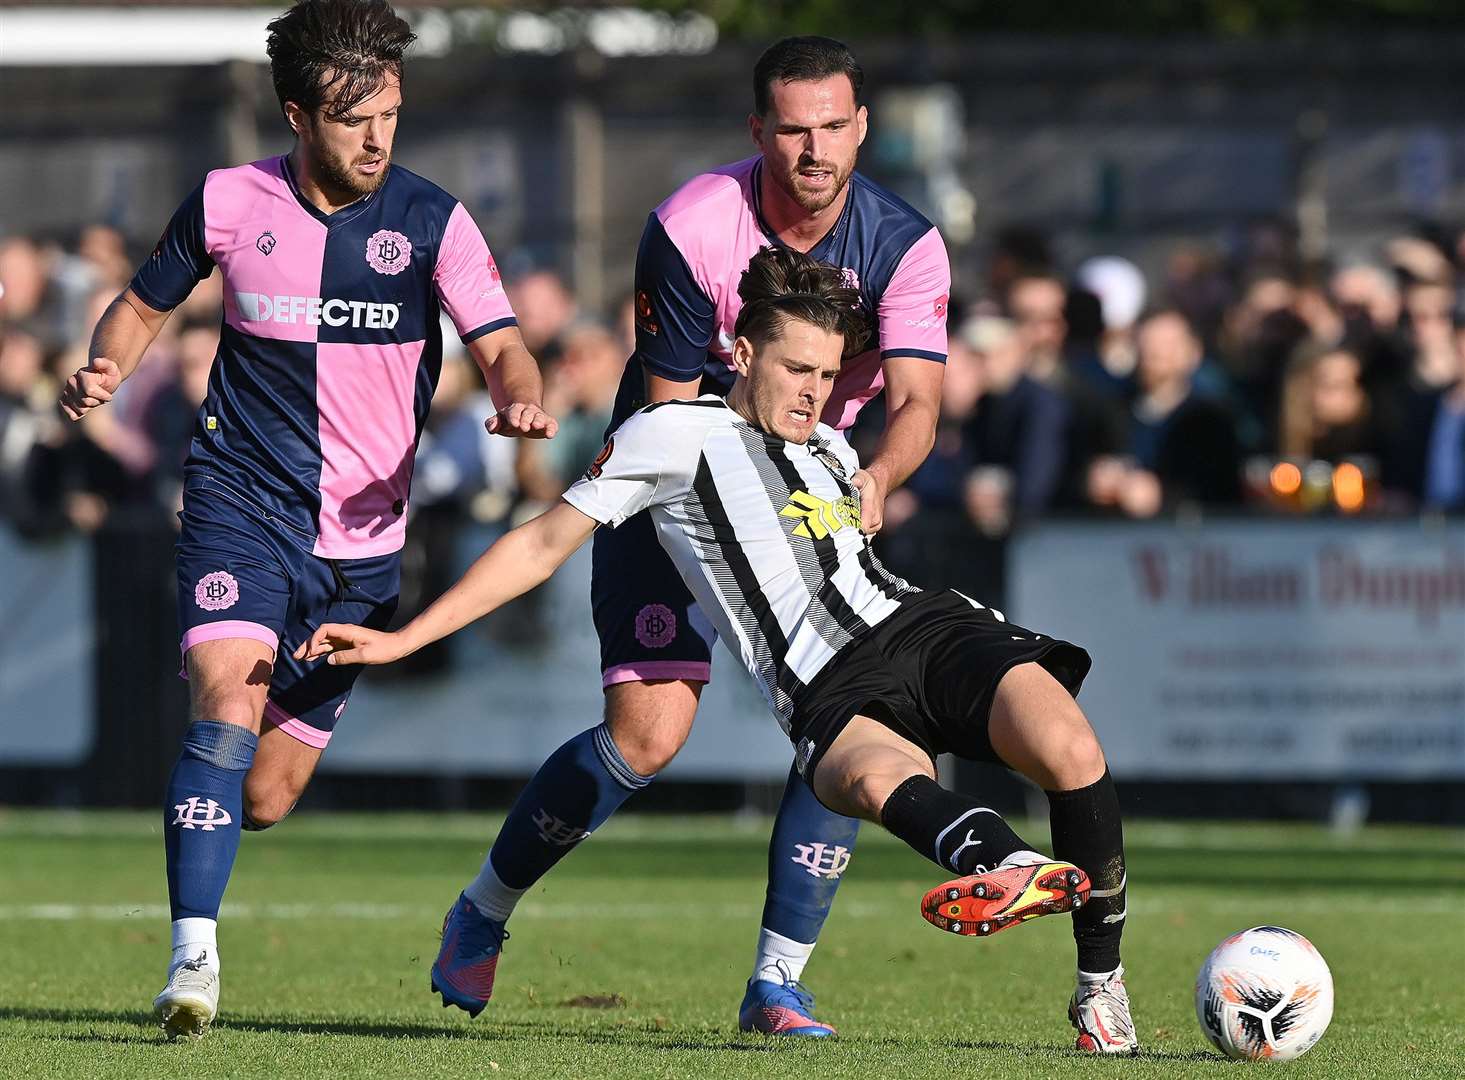 On-loan midfielder Jack Smith is pulled back at Dulwich. Picture: Keith Gillard